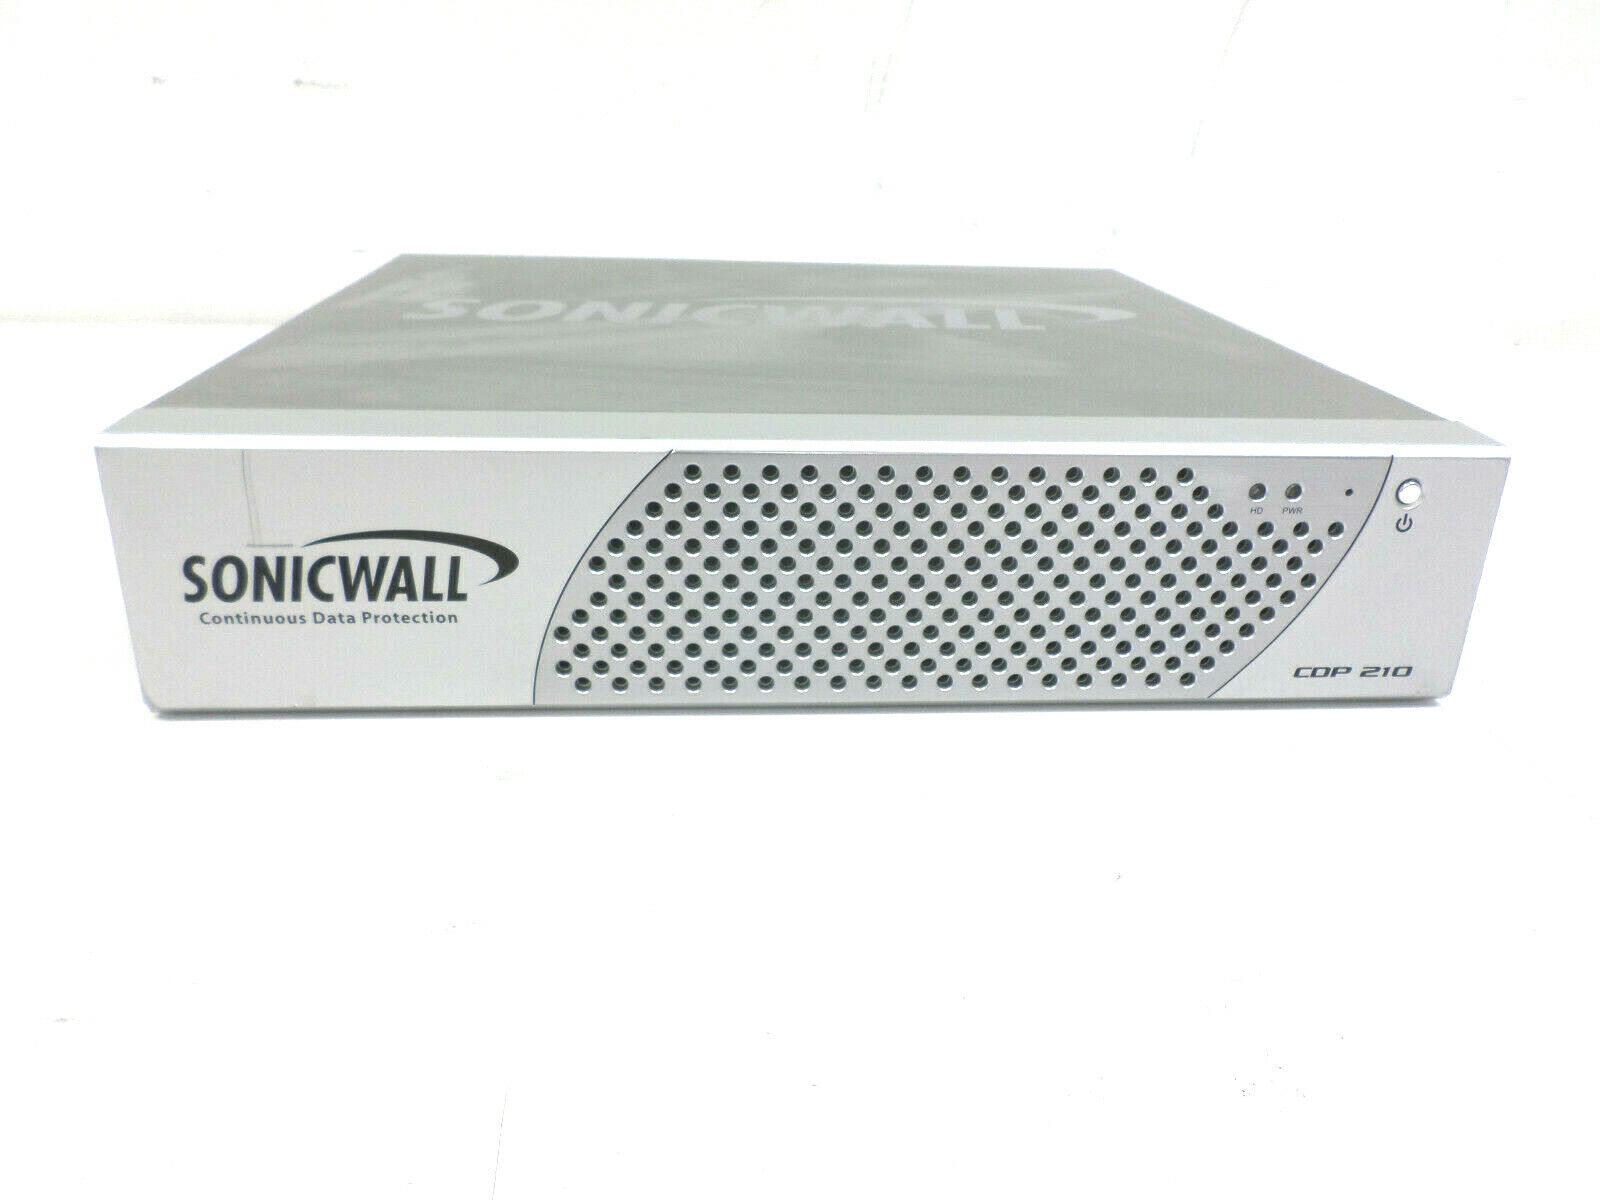 SonicWALL CDP-210 APL16-06B Continuous Data Protection Security Backup Unit 1TB